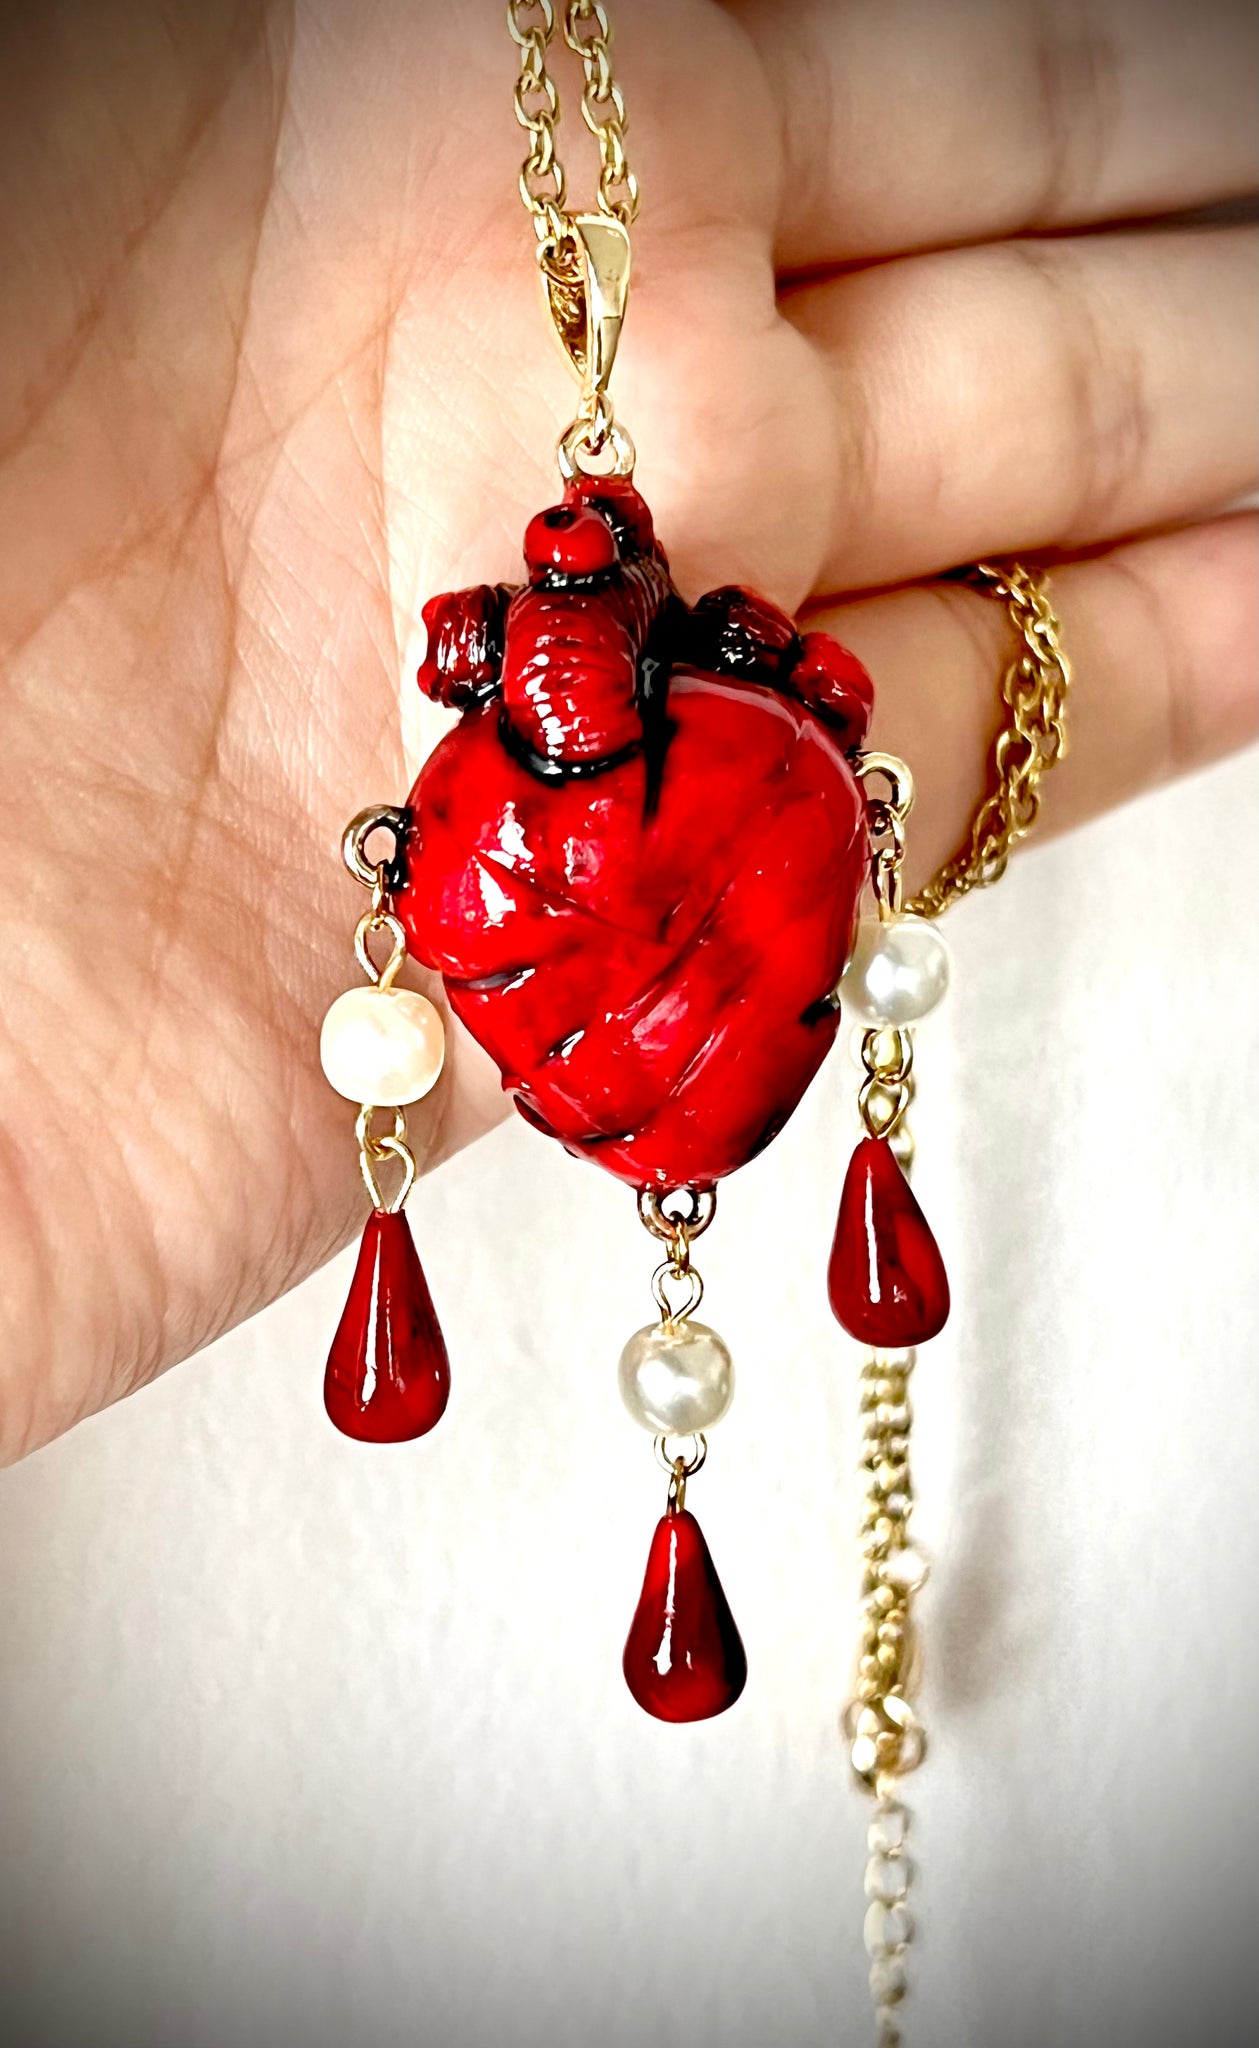 Customized Anatomical Heart Necklace